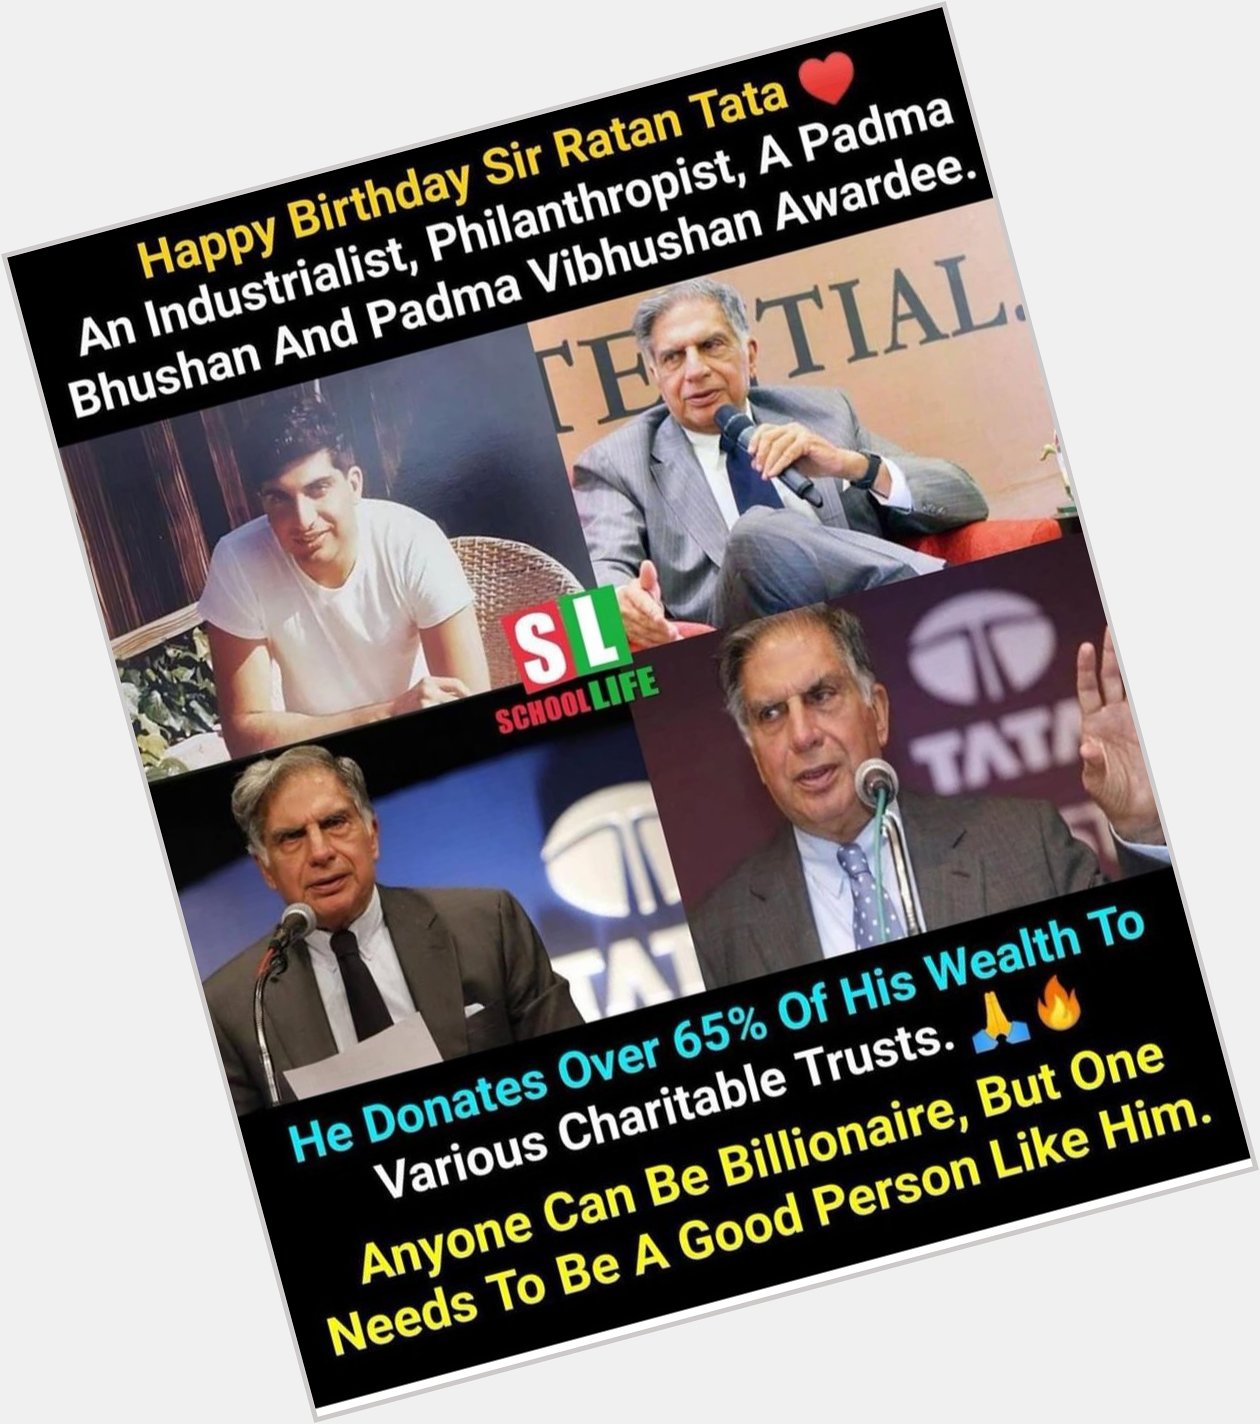 Happy birthday Ratan Tata Sir ... 
Your Contribution to Nation is Immense    